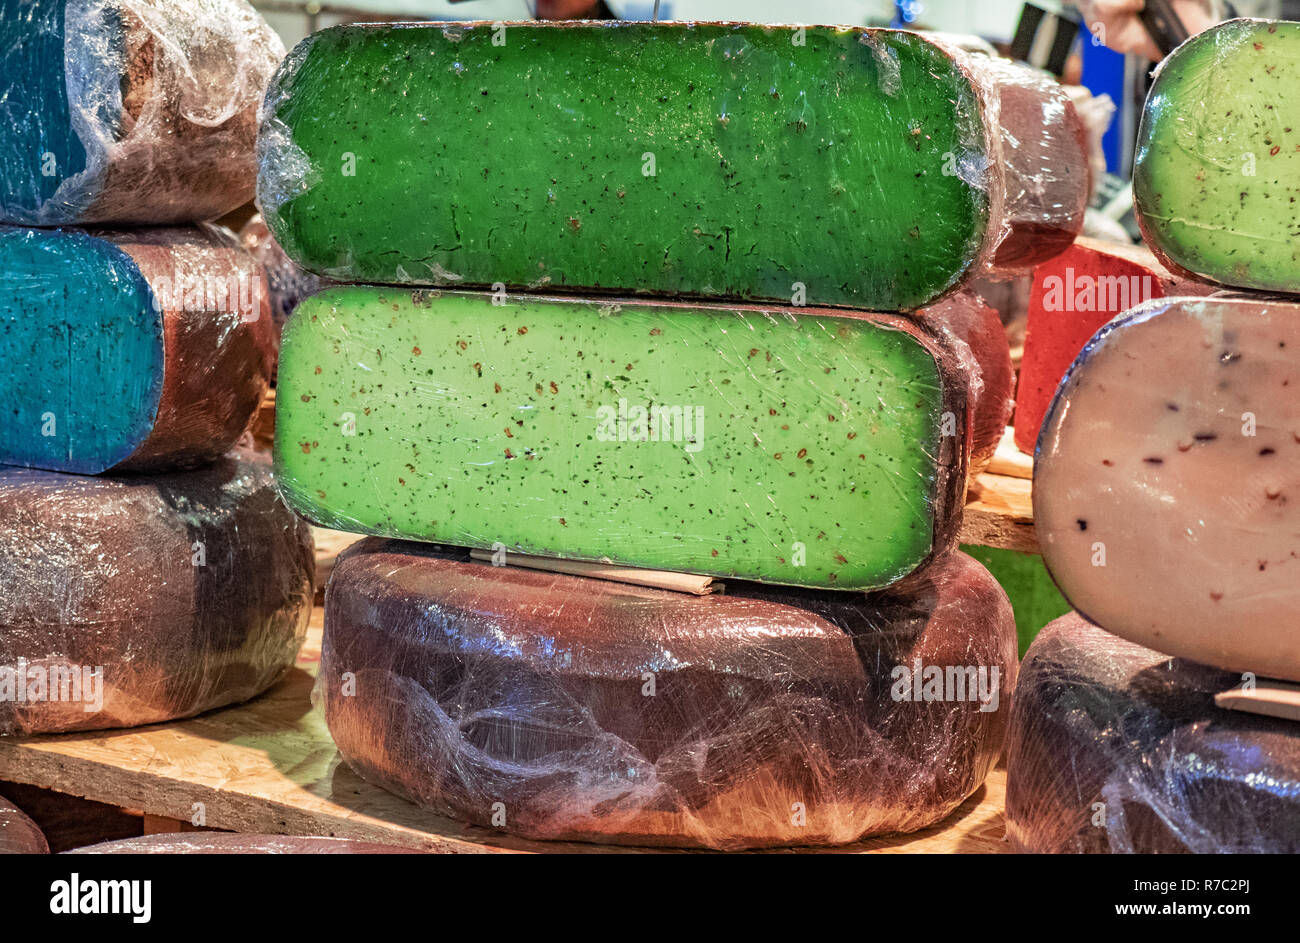 artisan cheeses flavored with natural pigments that give bright colors Stock Photo